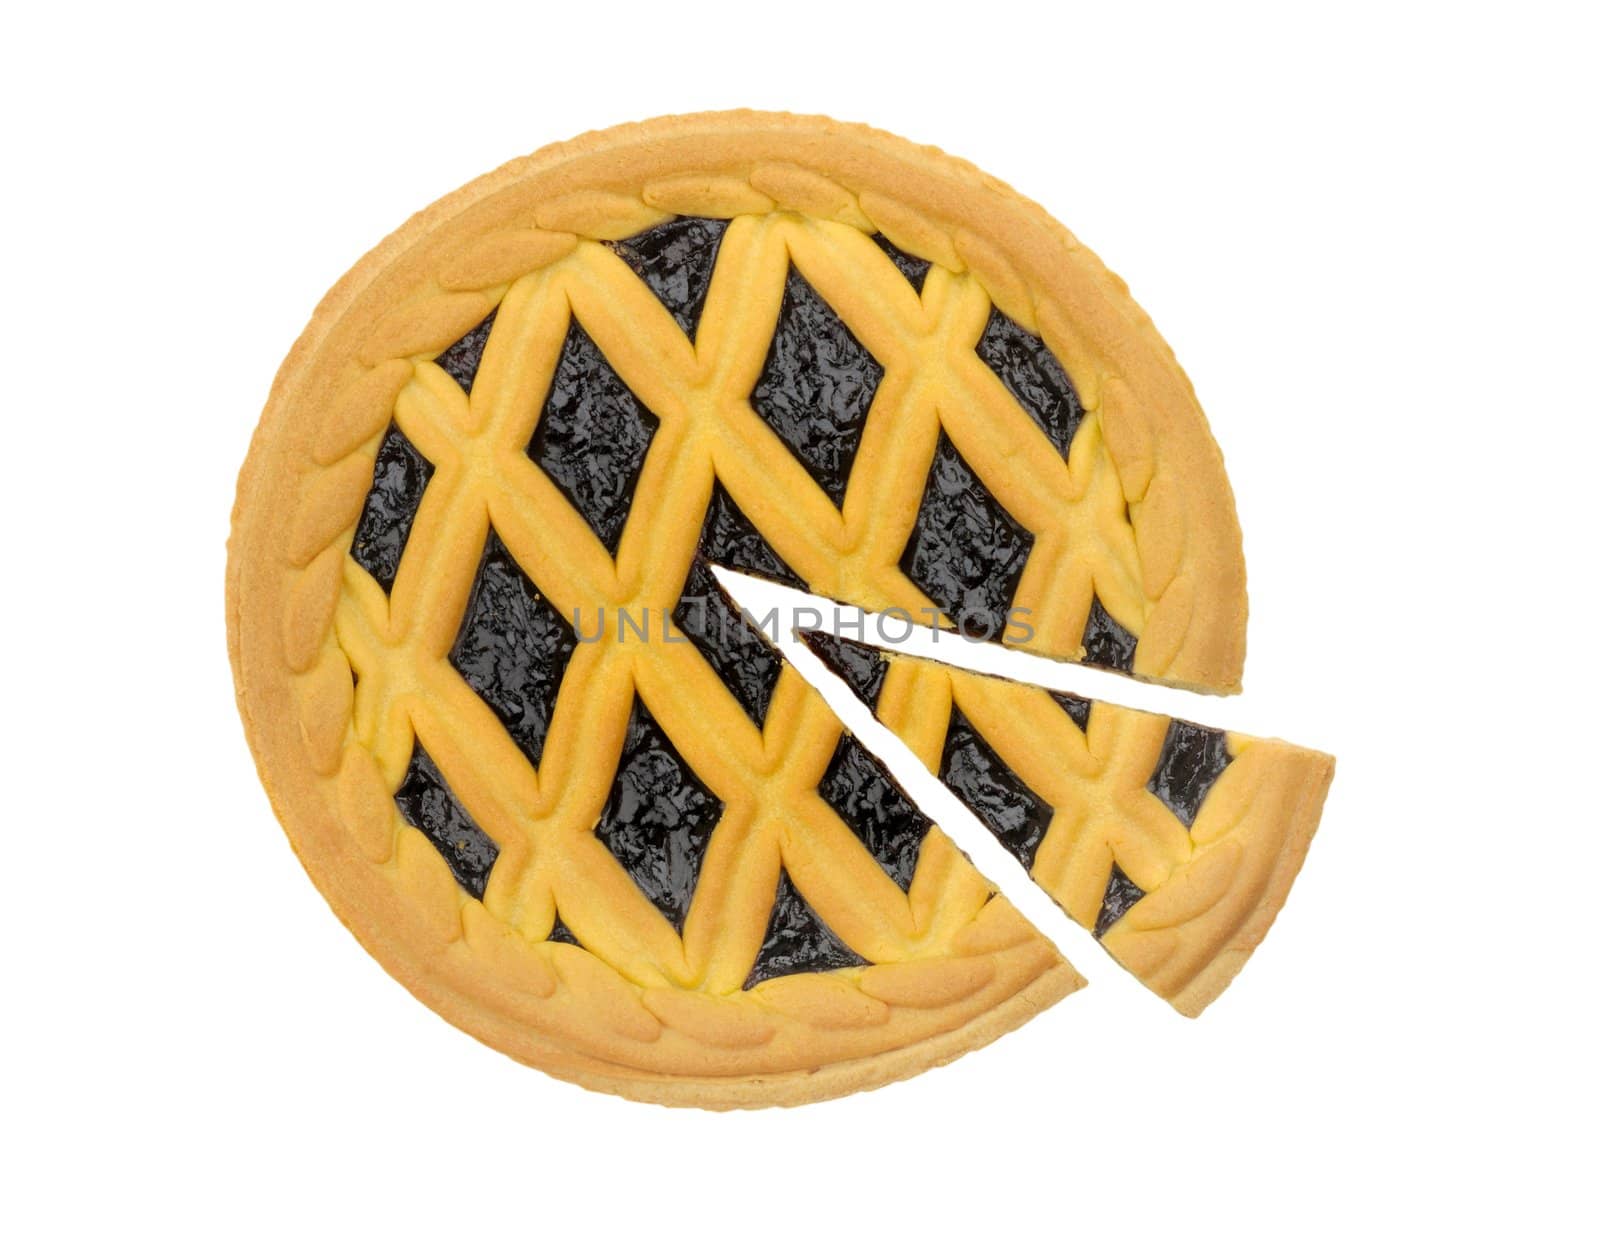 blueberry pie isolated on a white background